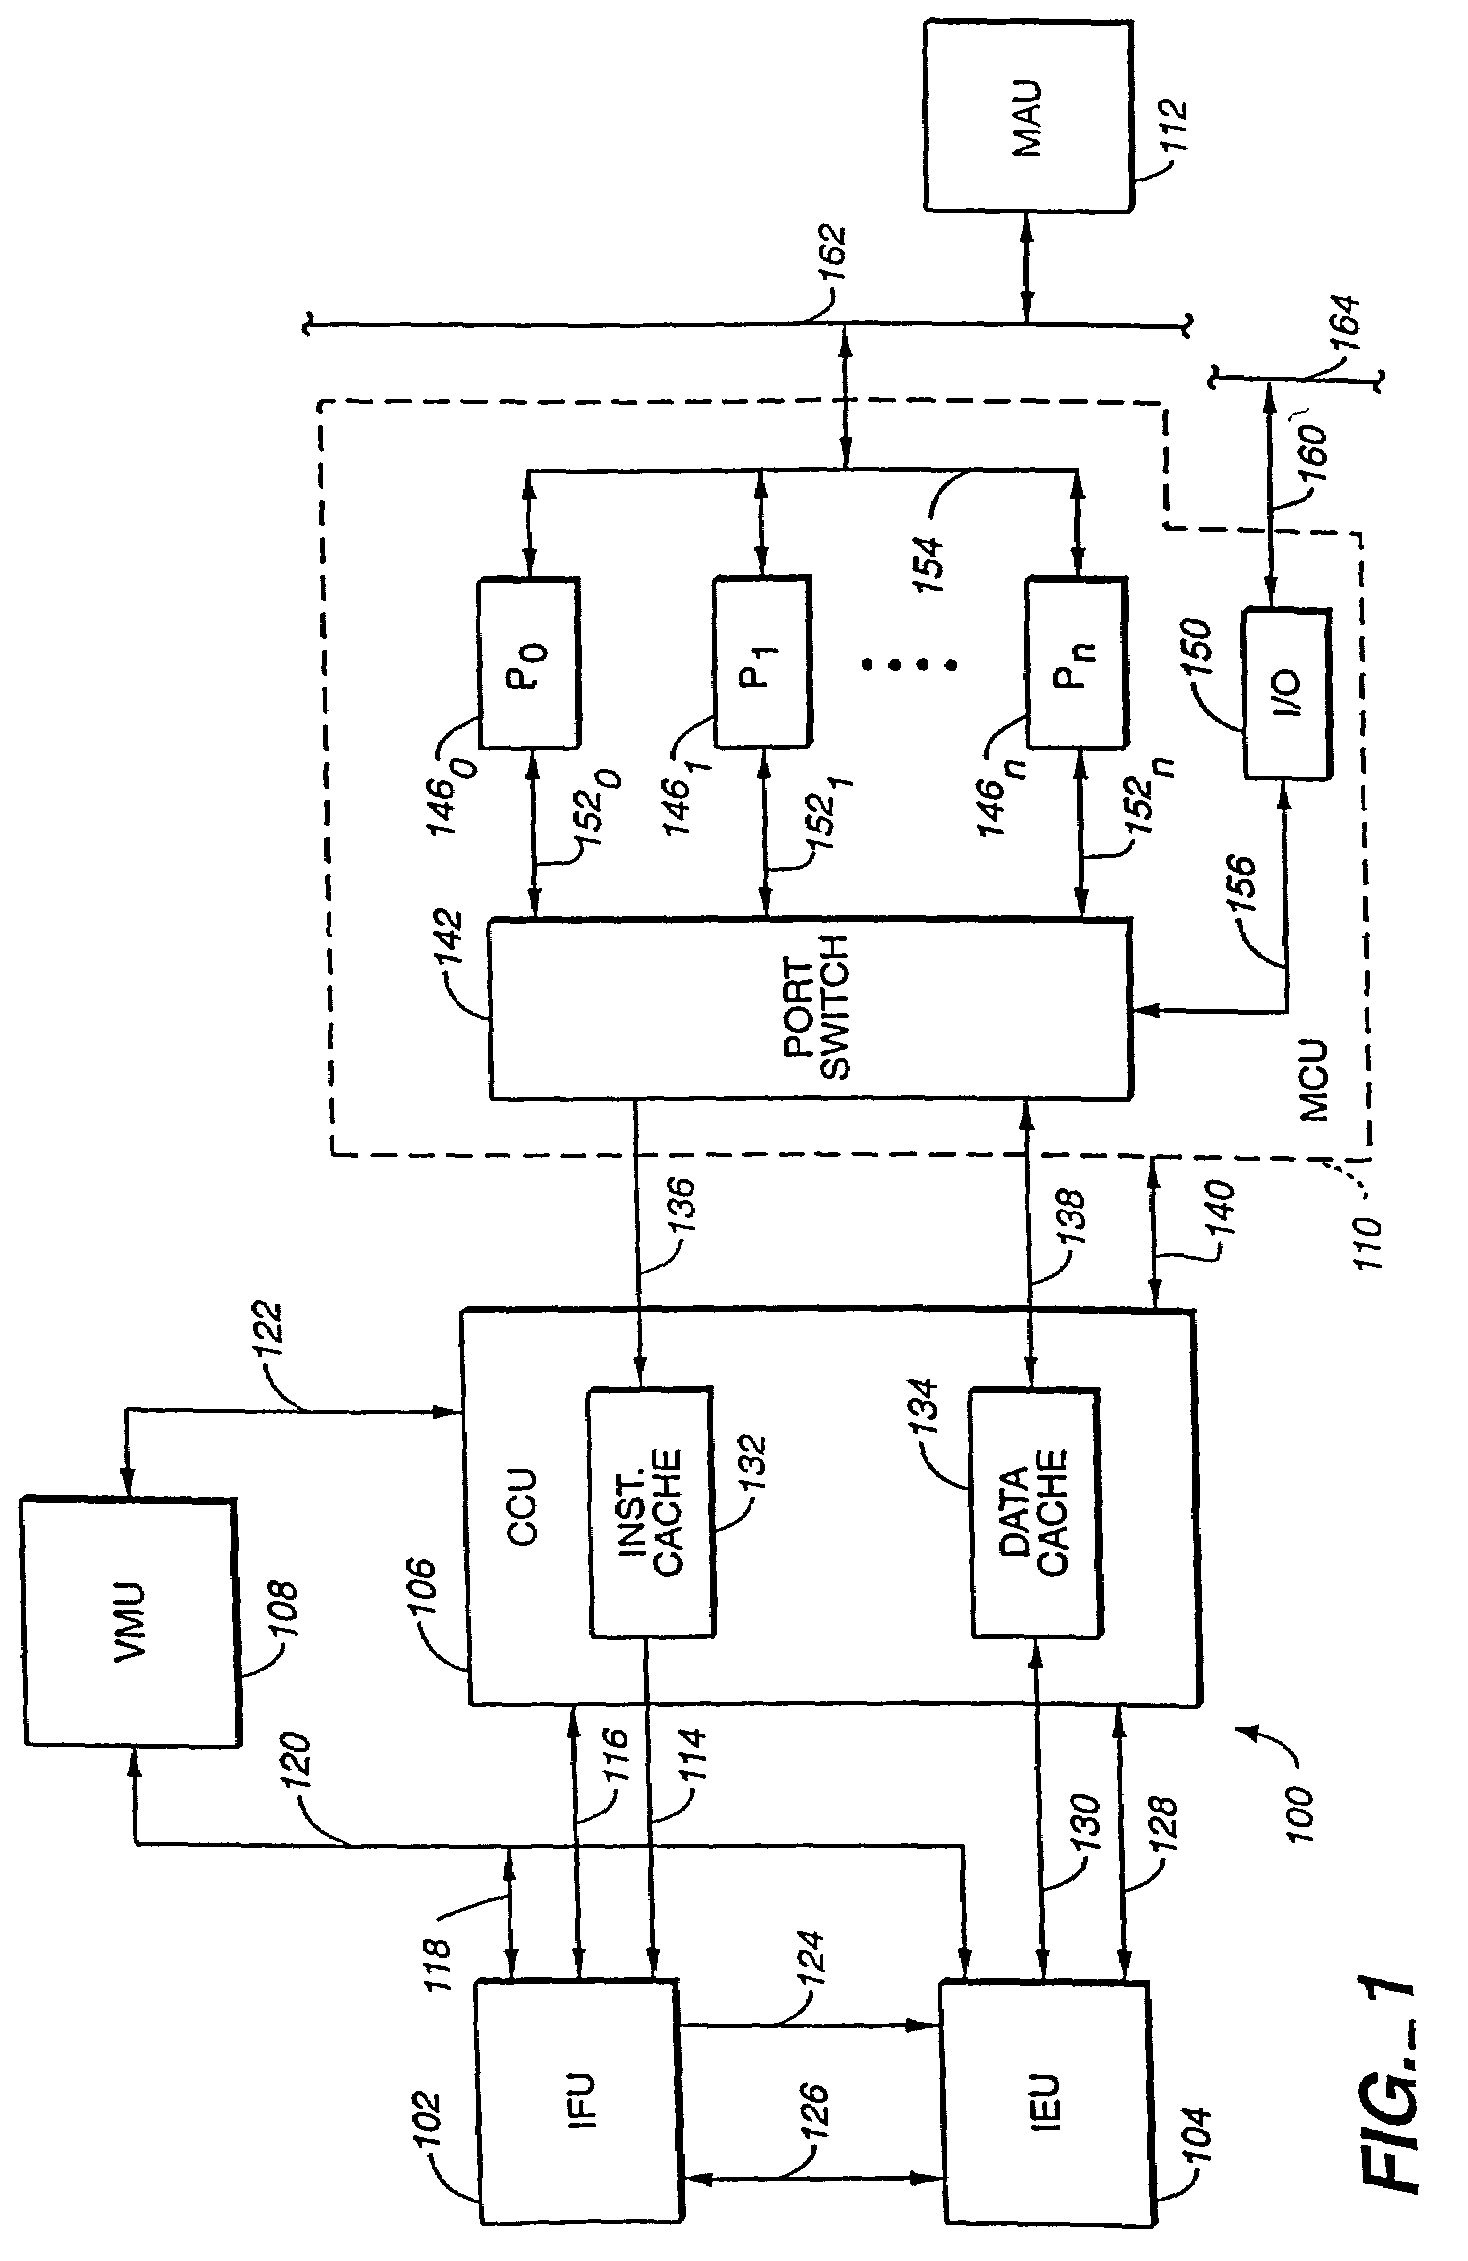 High-performance superscalar-based computer system with out-of-order instruction execution and concurrent results distribution